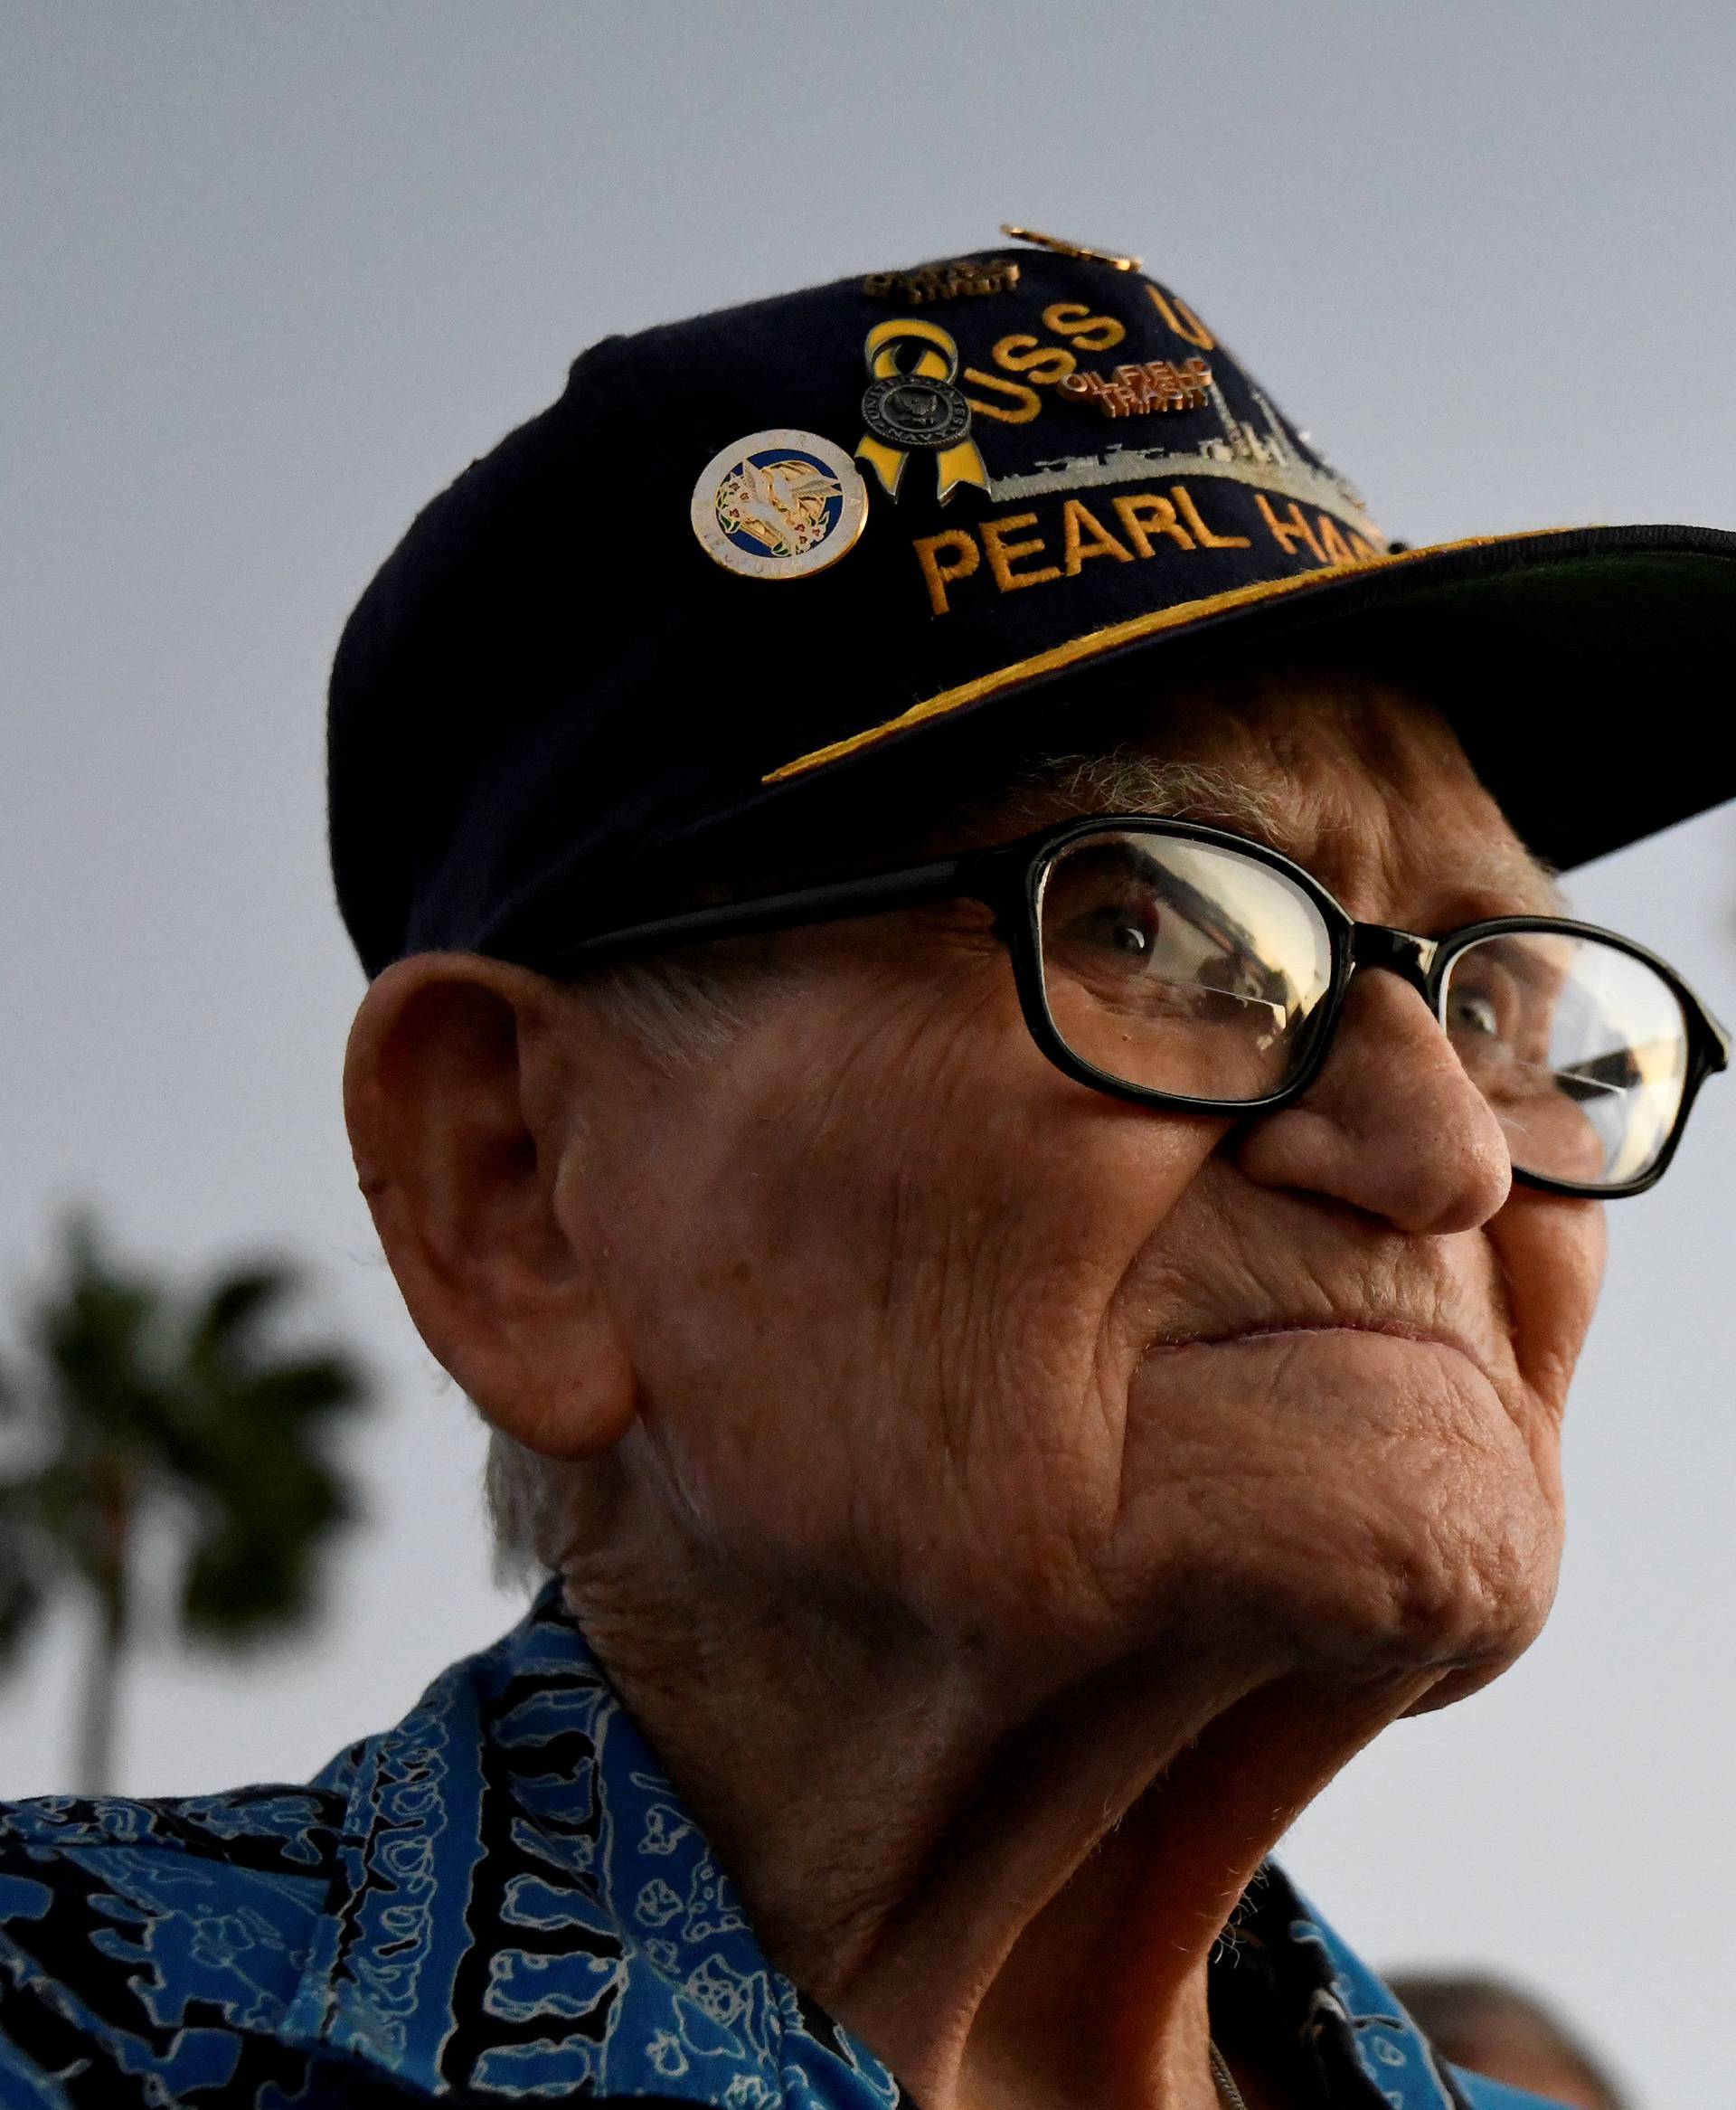 Pearl Harbor survivor Bill Hughes, who was aboard the USS Utah when it was attacked, arrives at a ceremony honoring the sailors of the USS Utah at the memorial on Ford Island at Pearl Harbor in Honolulu, Hawaii